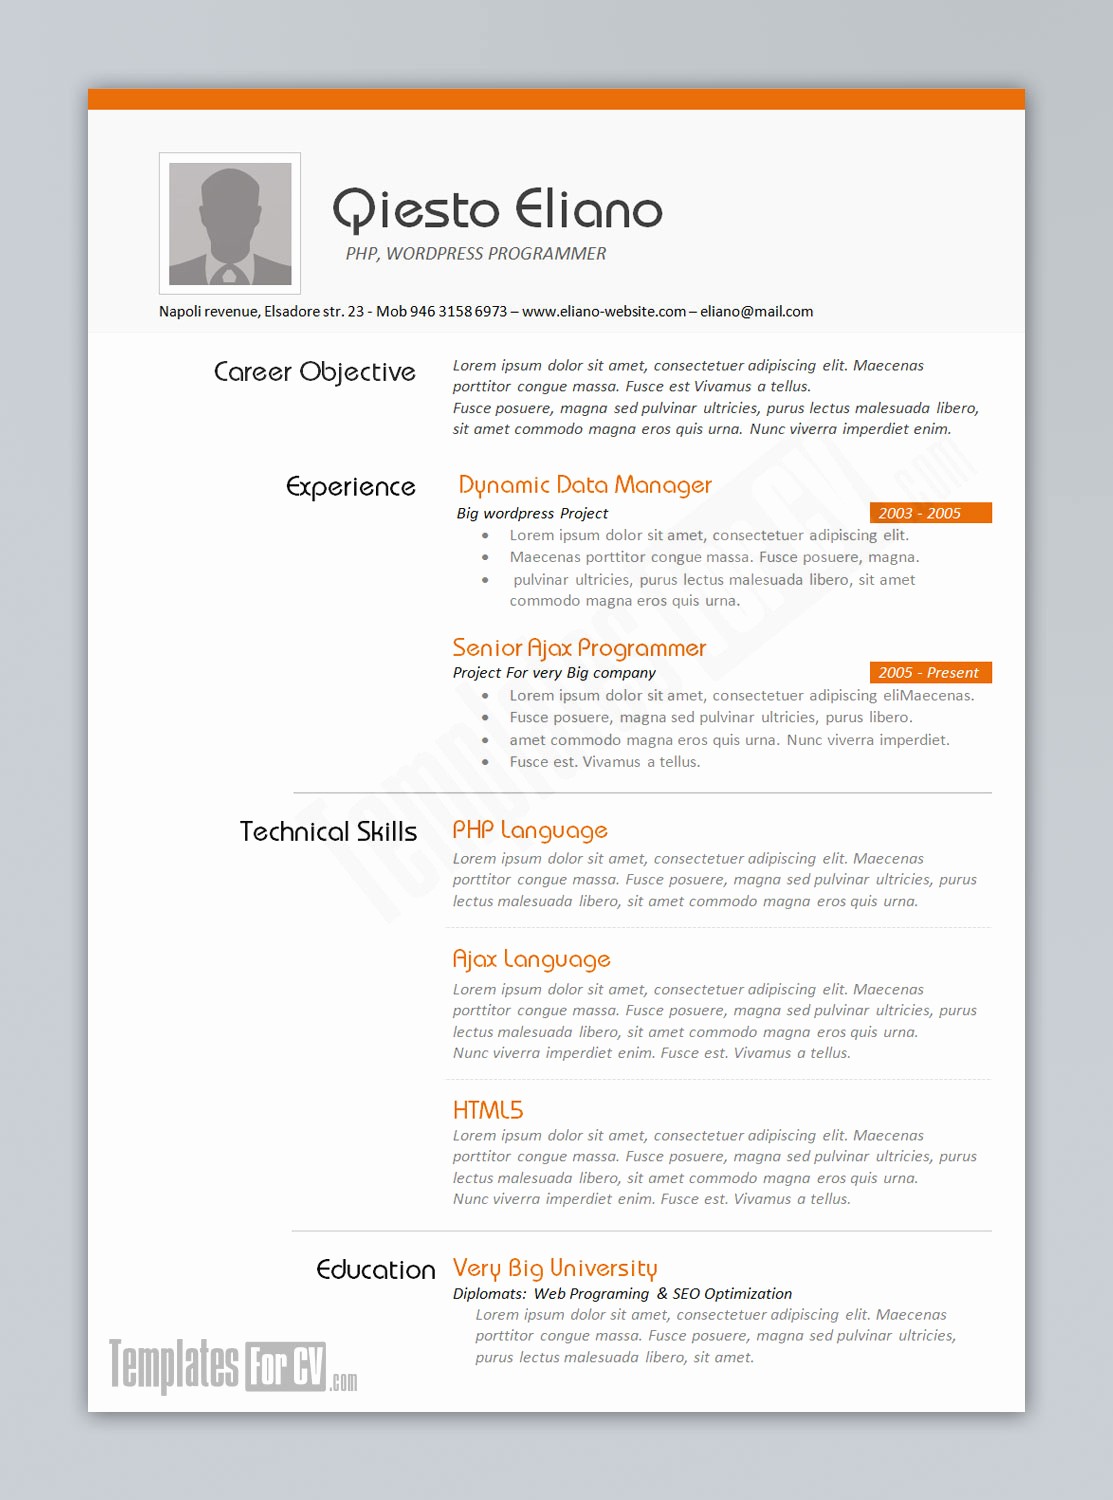 Where to Find Resume Templates Awesome Programmer Resume Template